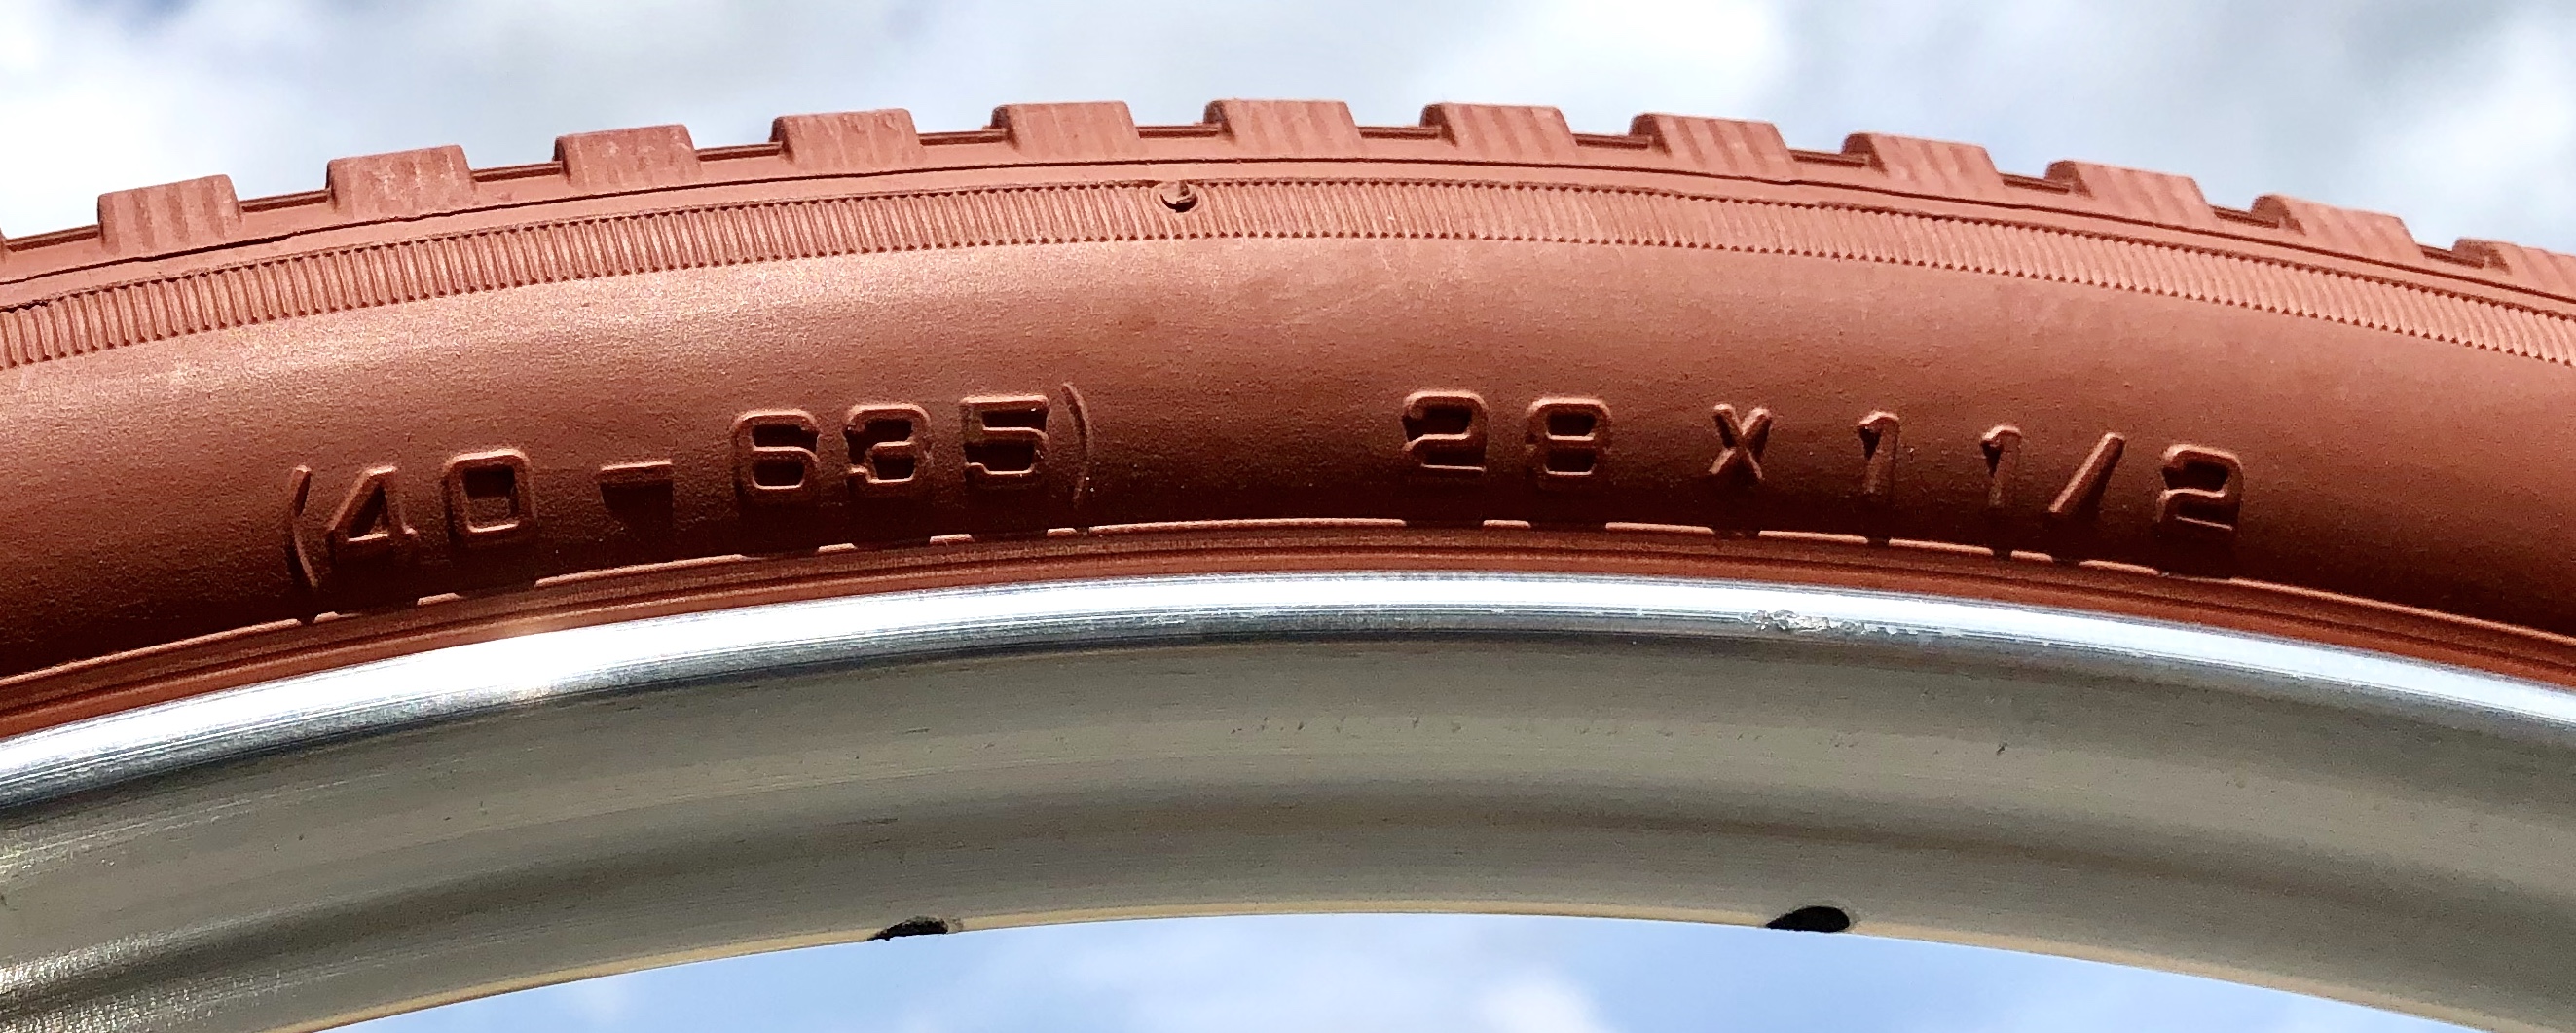 28x1 1/2  40x635 Tires Clay Brick RED Color